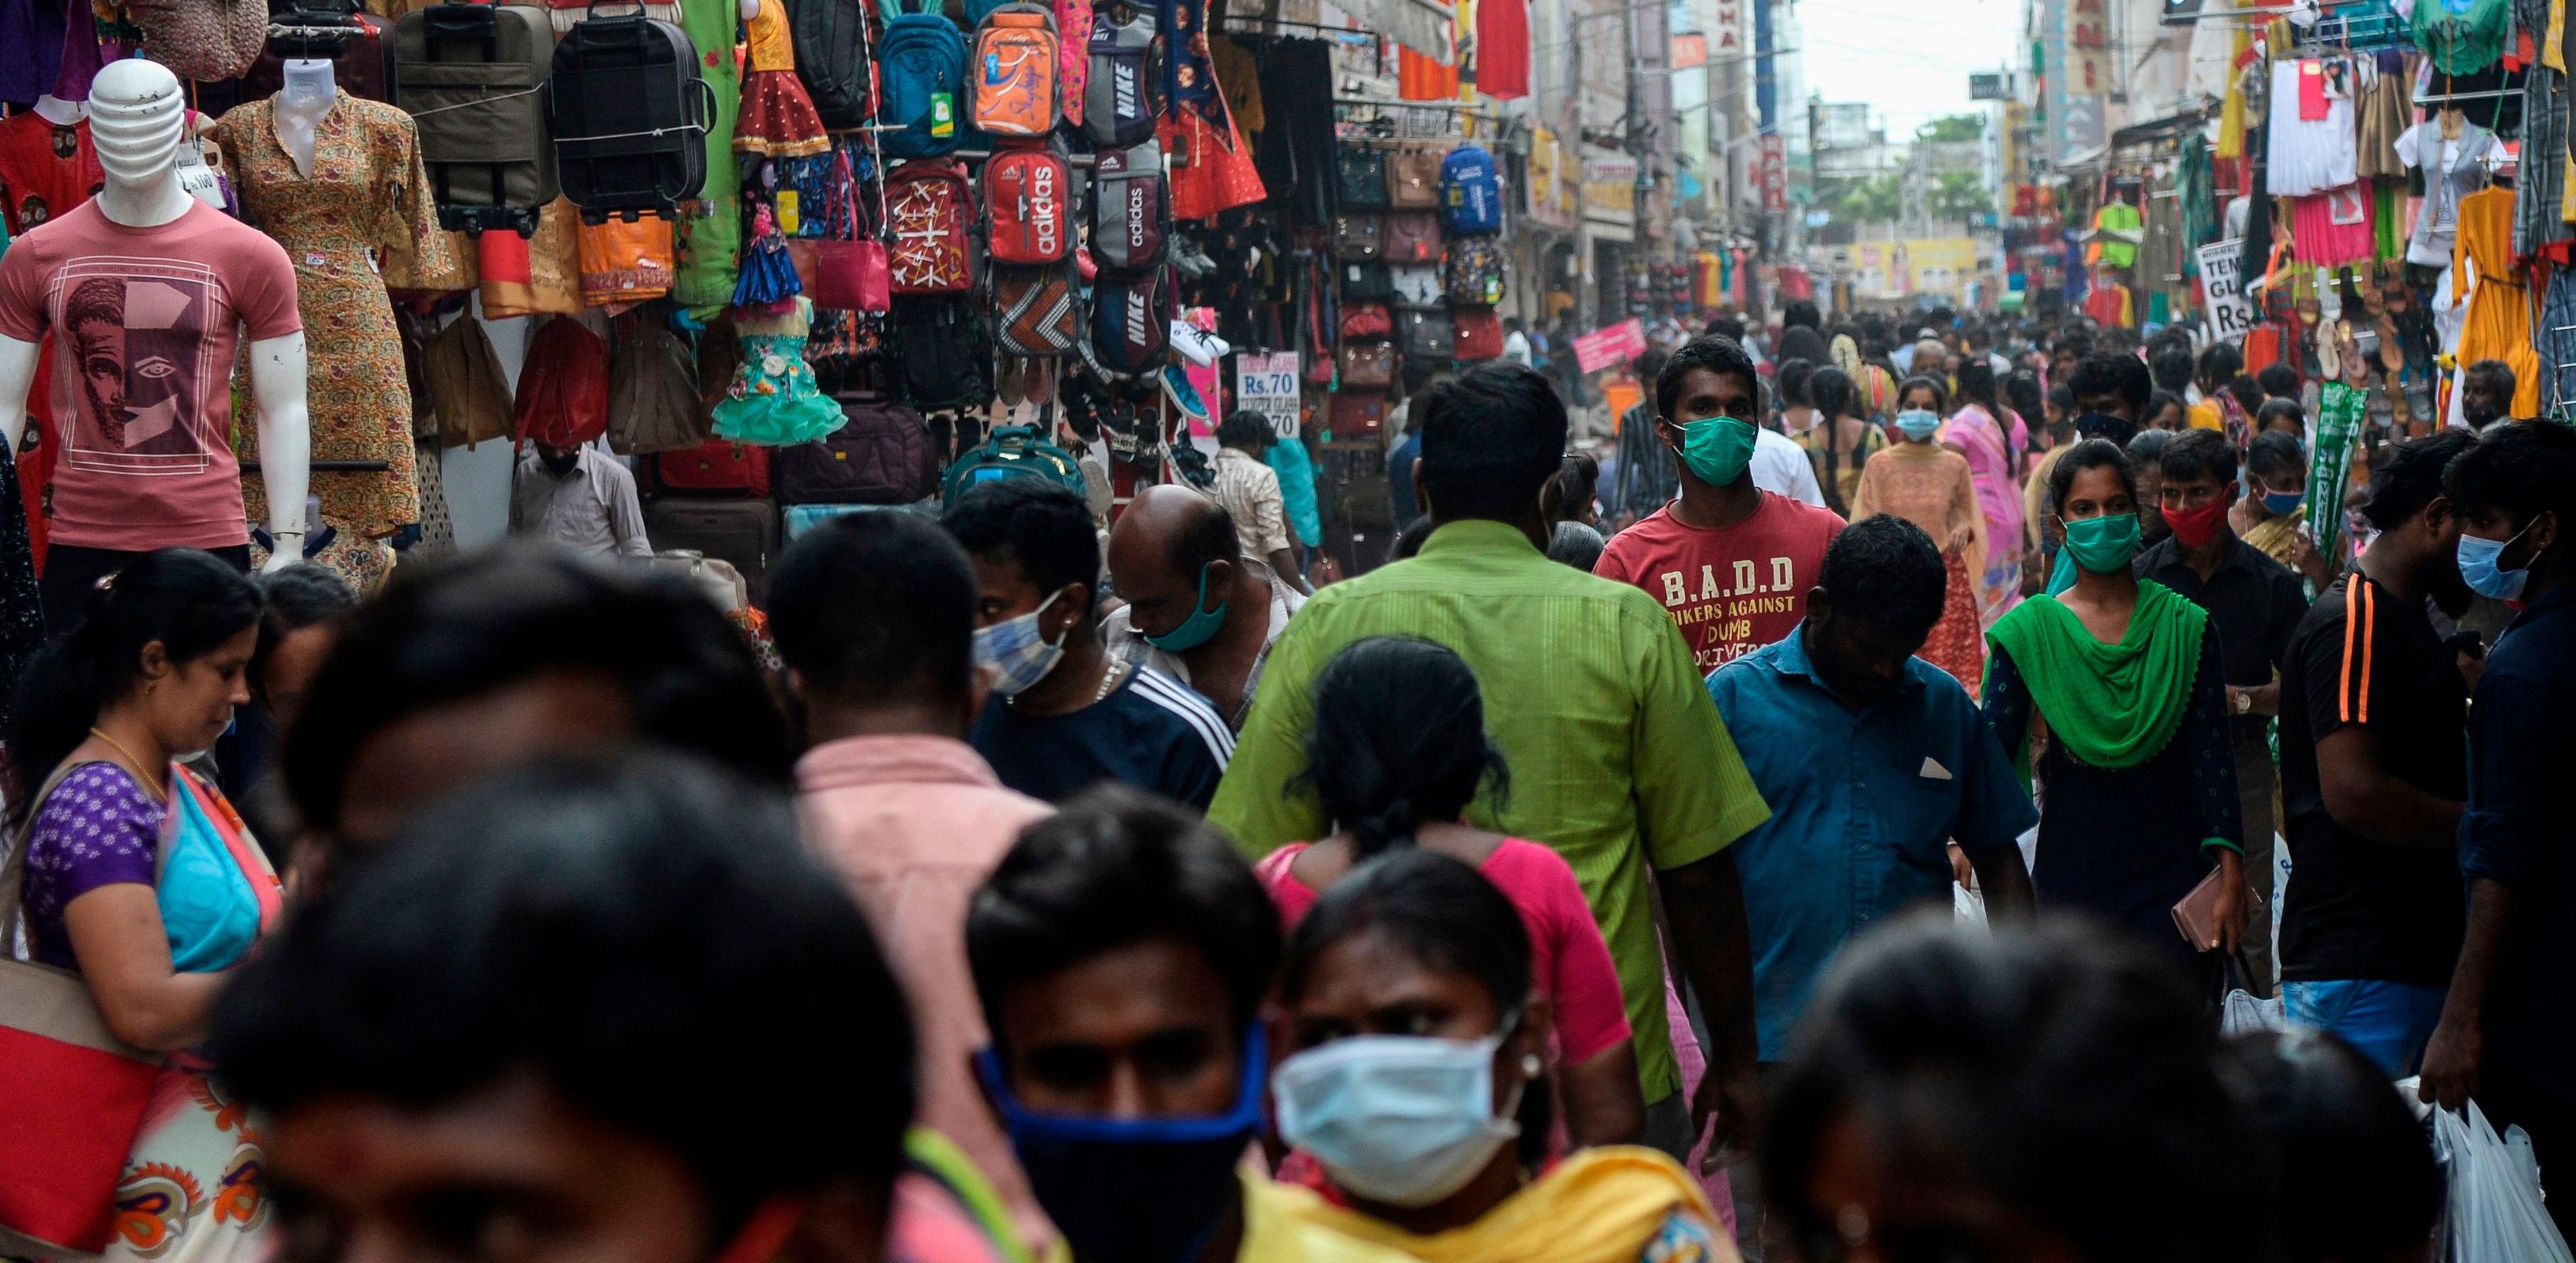 People wearing facemasks to prevent the spread of the Covid-19 coronavirus walk along a commercial street in Chennai. Credit: AFP